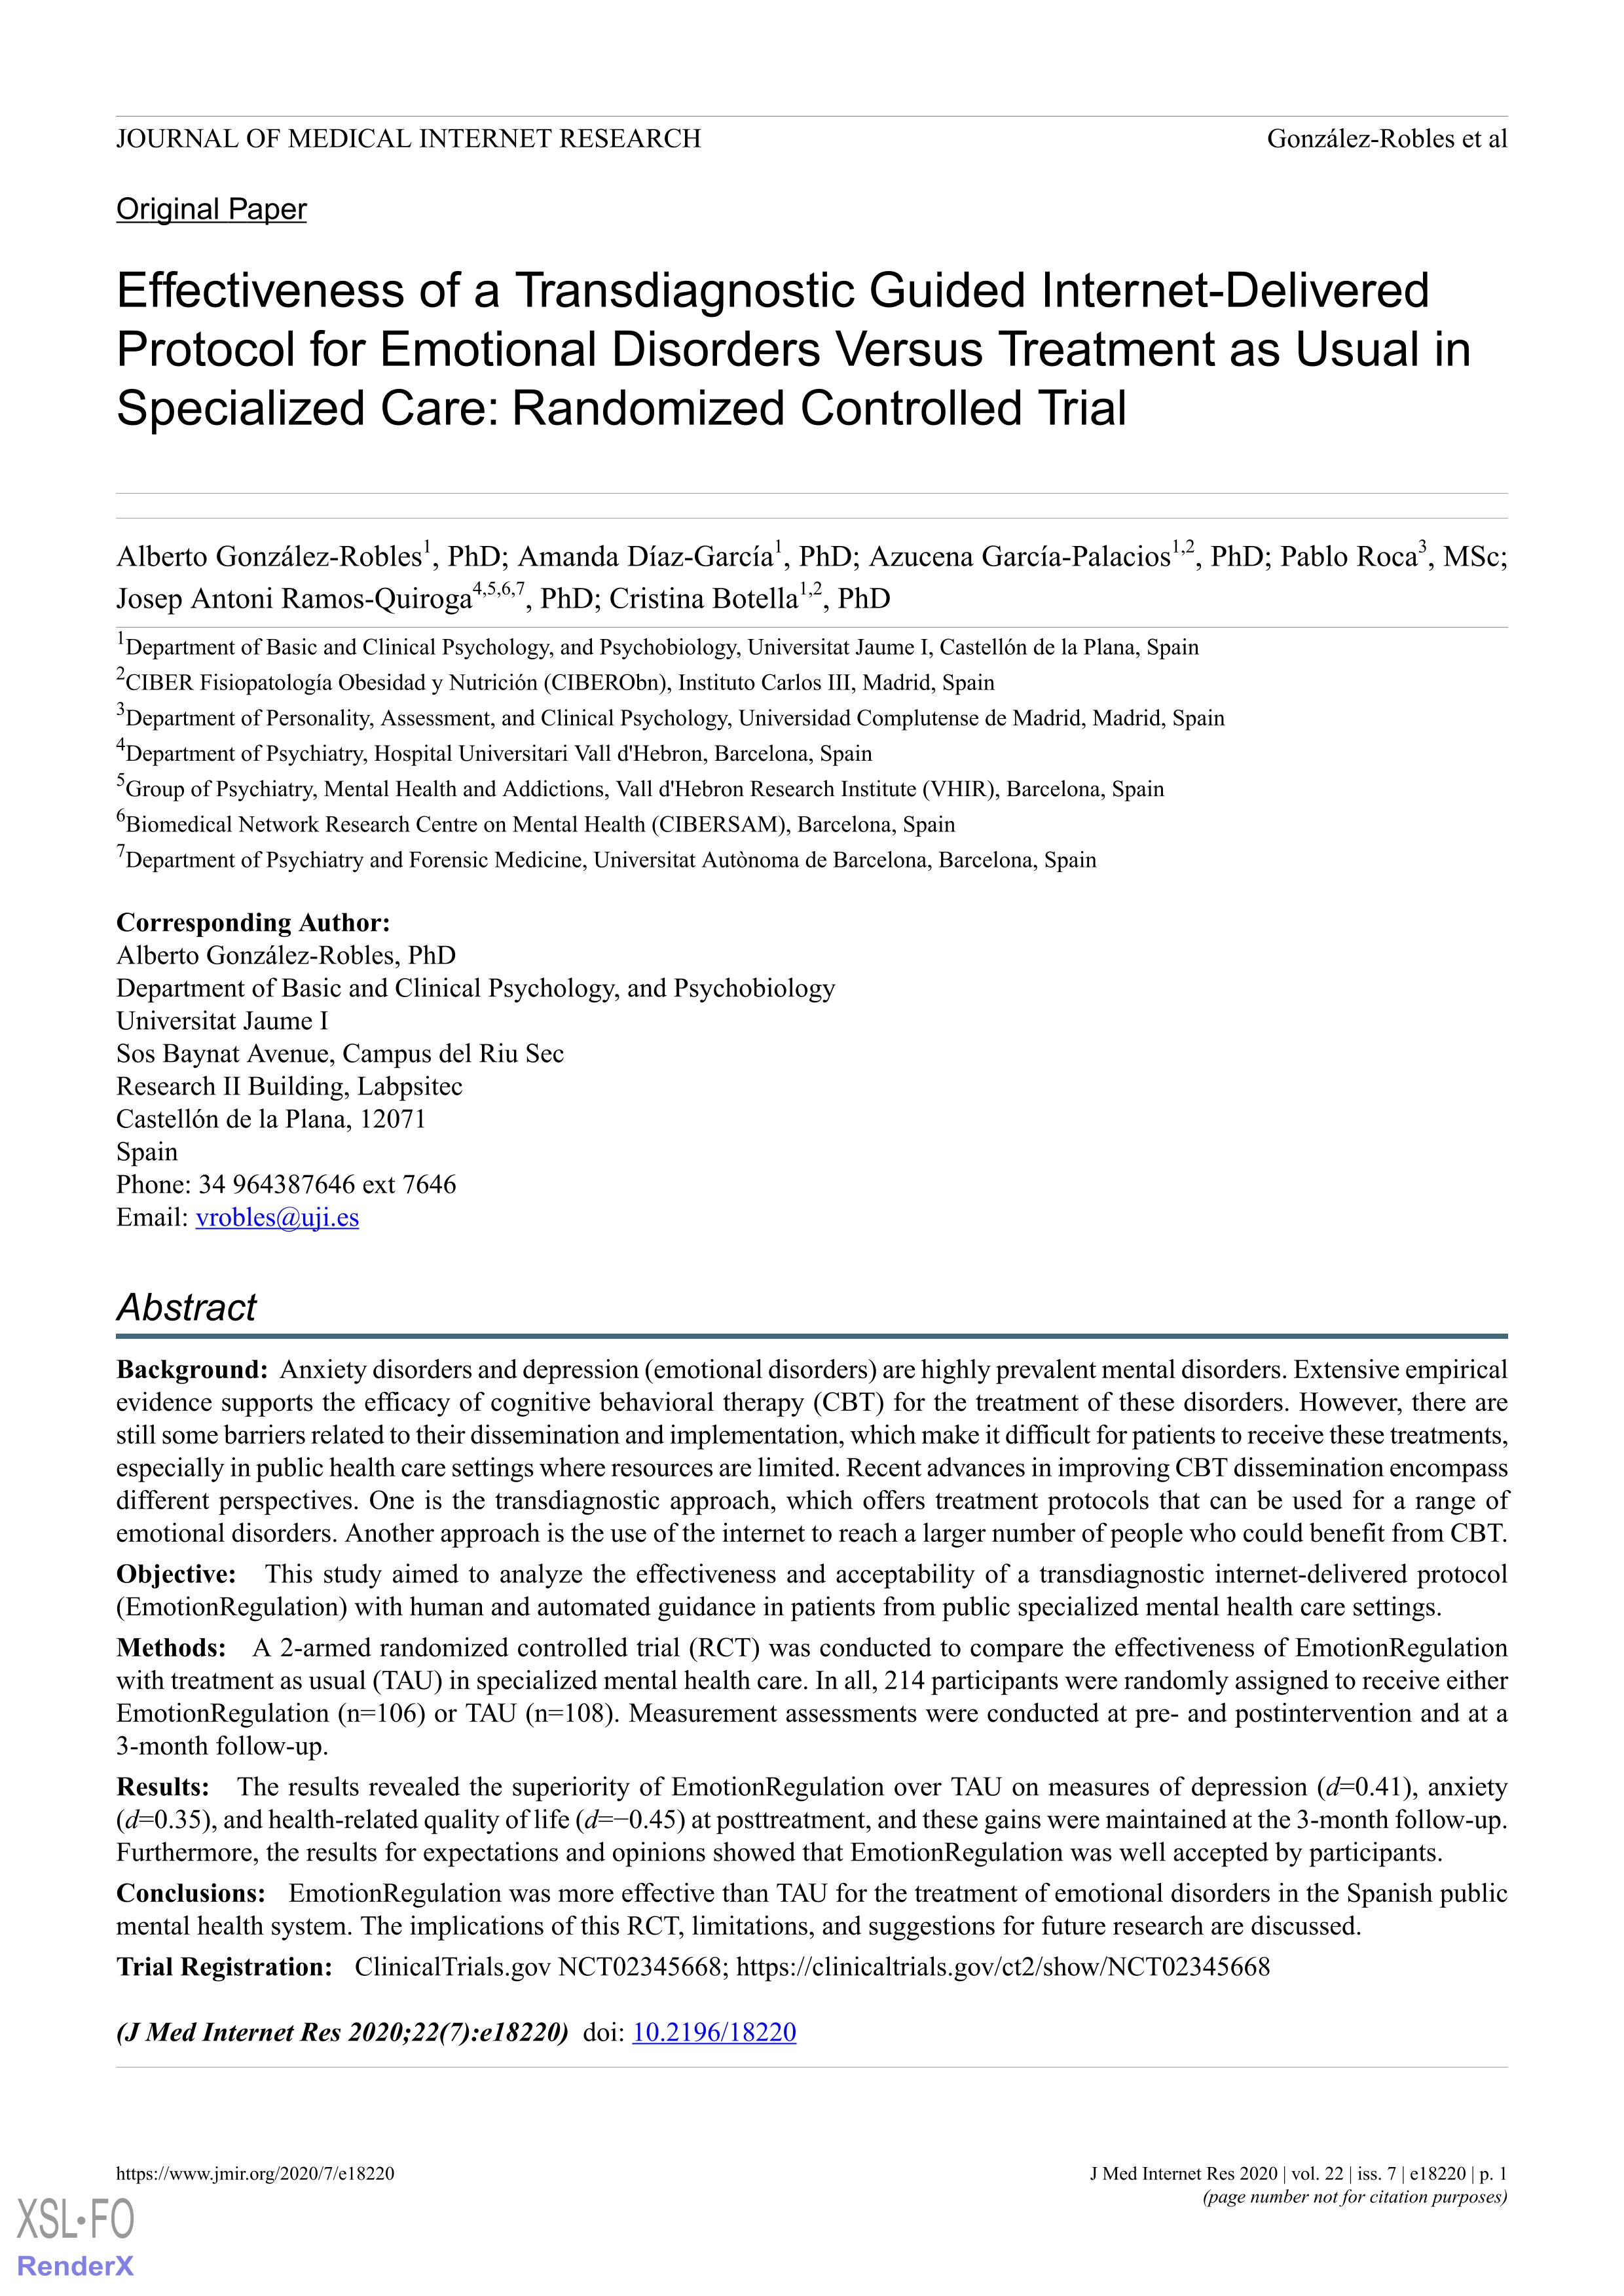 Effectiveness of a Transdiagnostic Guided Internet-Delivered Protocol for Emotional Disorders Versus Treatment as Usual in Specialized Care: Randomized Controlled Trial